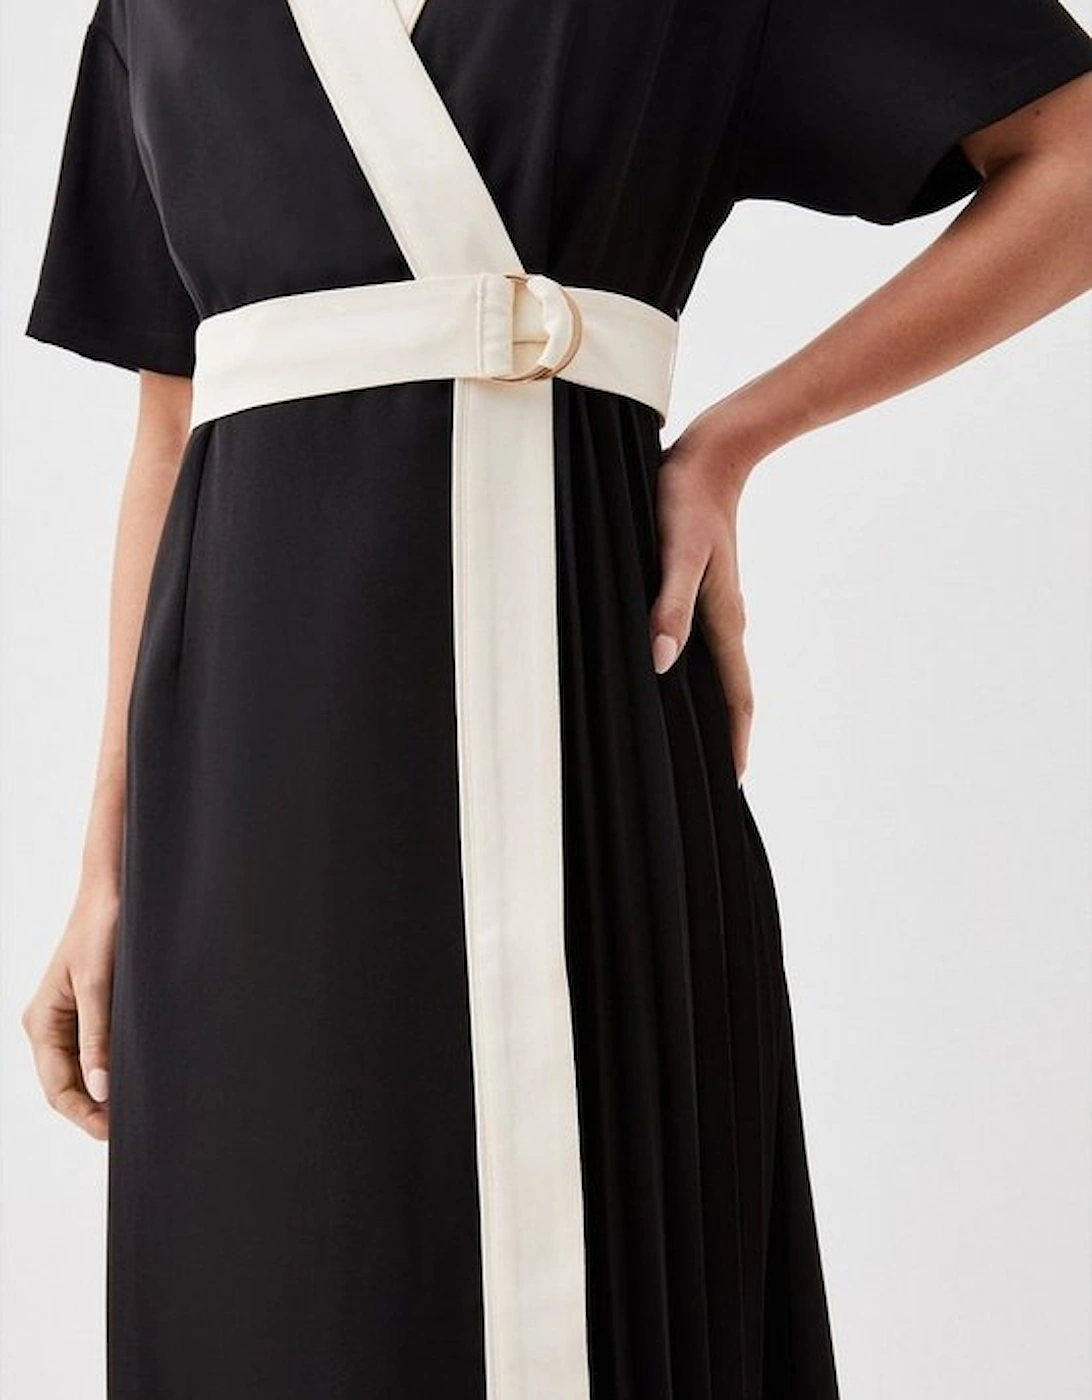 Petite Contrast Twill Button Detail Belted Midi Dress